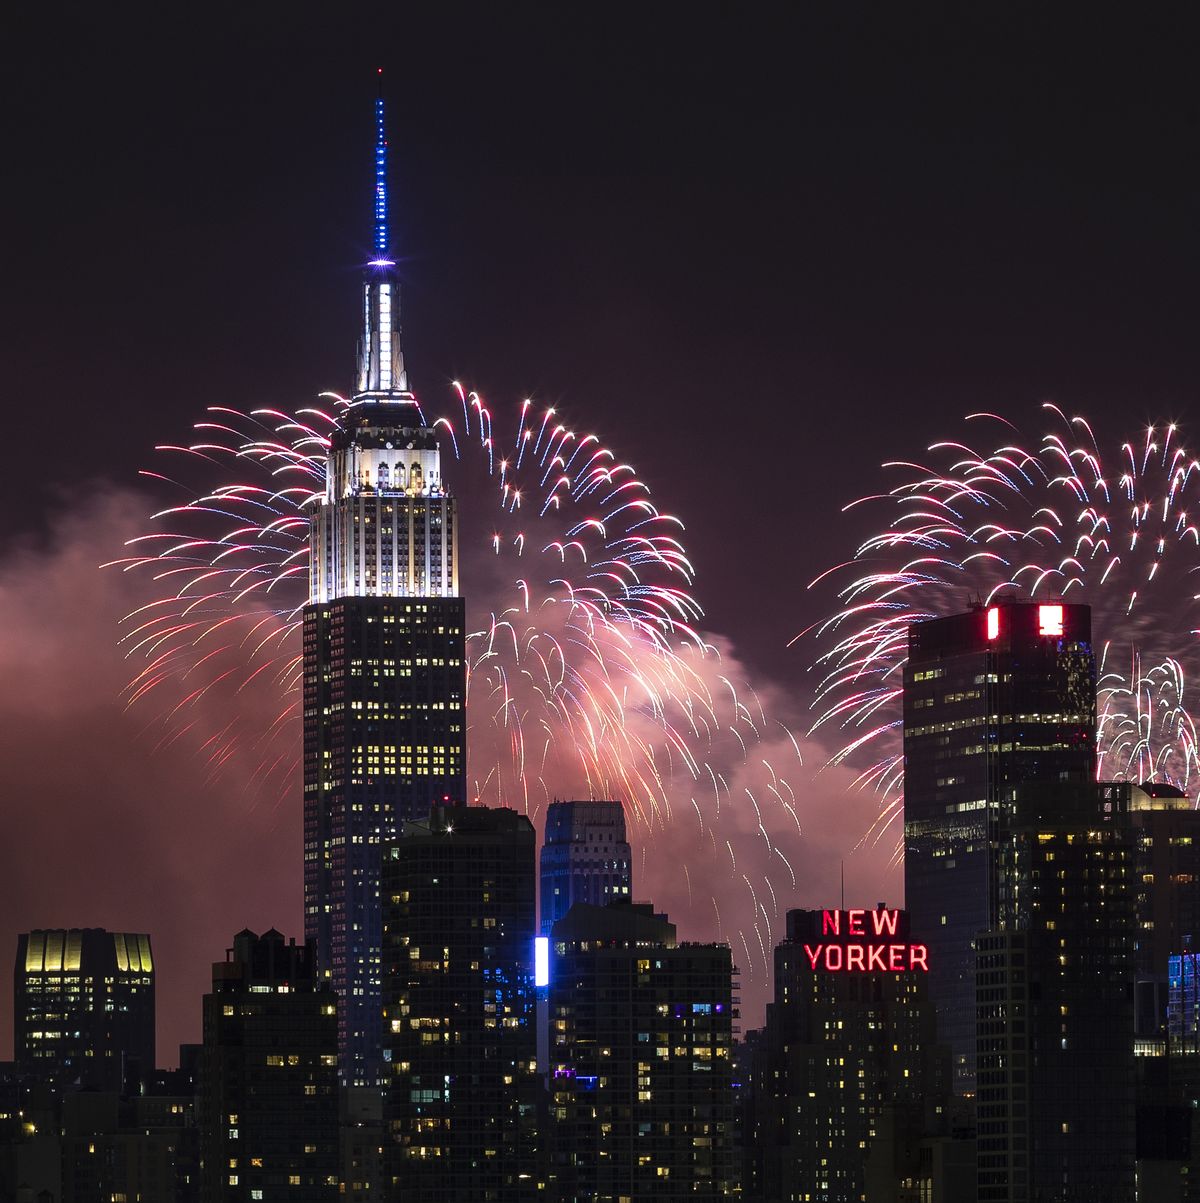 Where and When to Watch Macy's 4th of July Fireworks - What Time Does the 2019 Show Start?